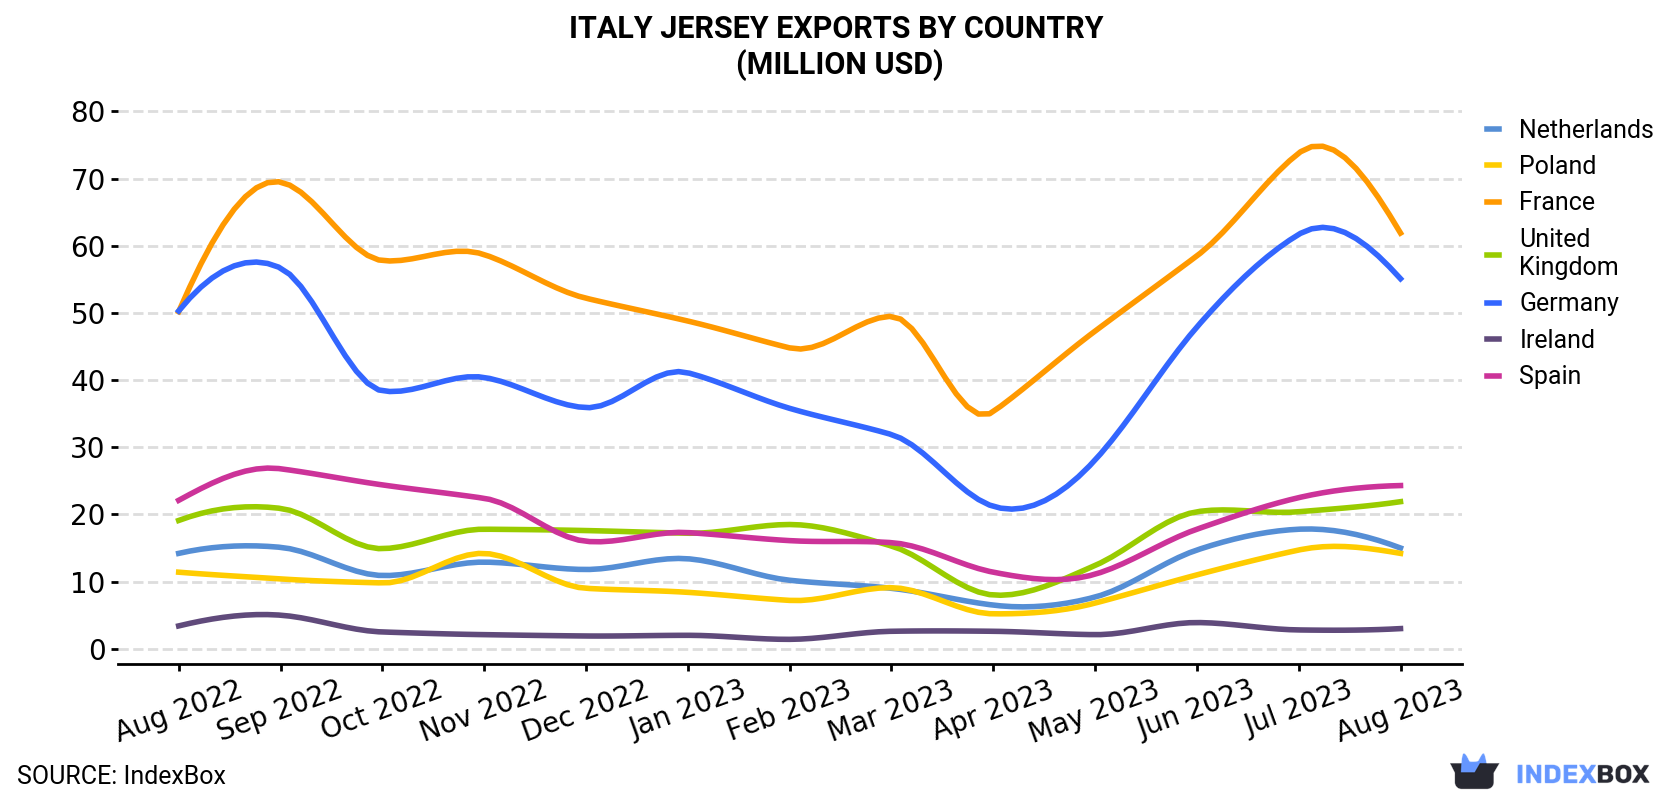 Italy Jersey Exports By Country (Million USD)